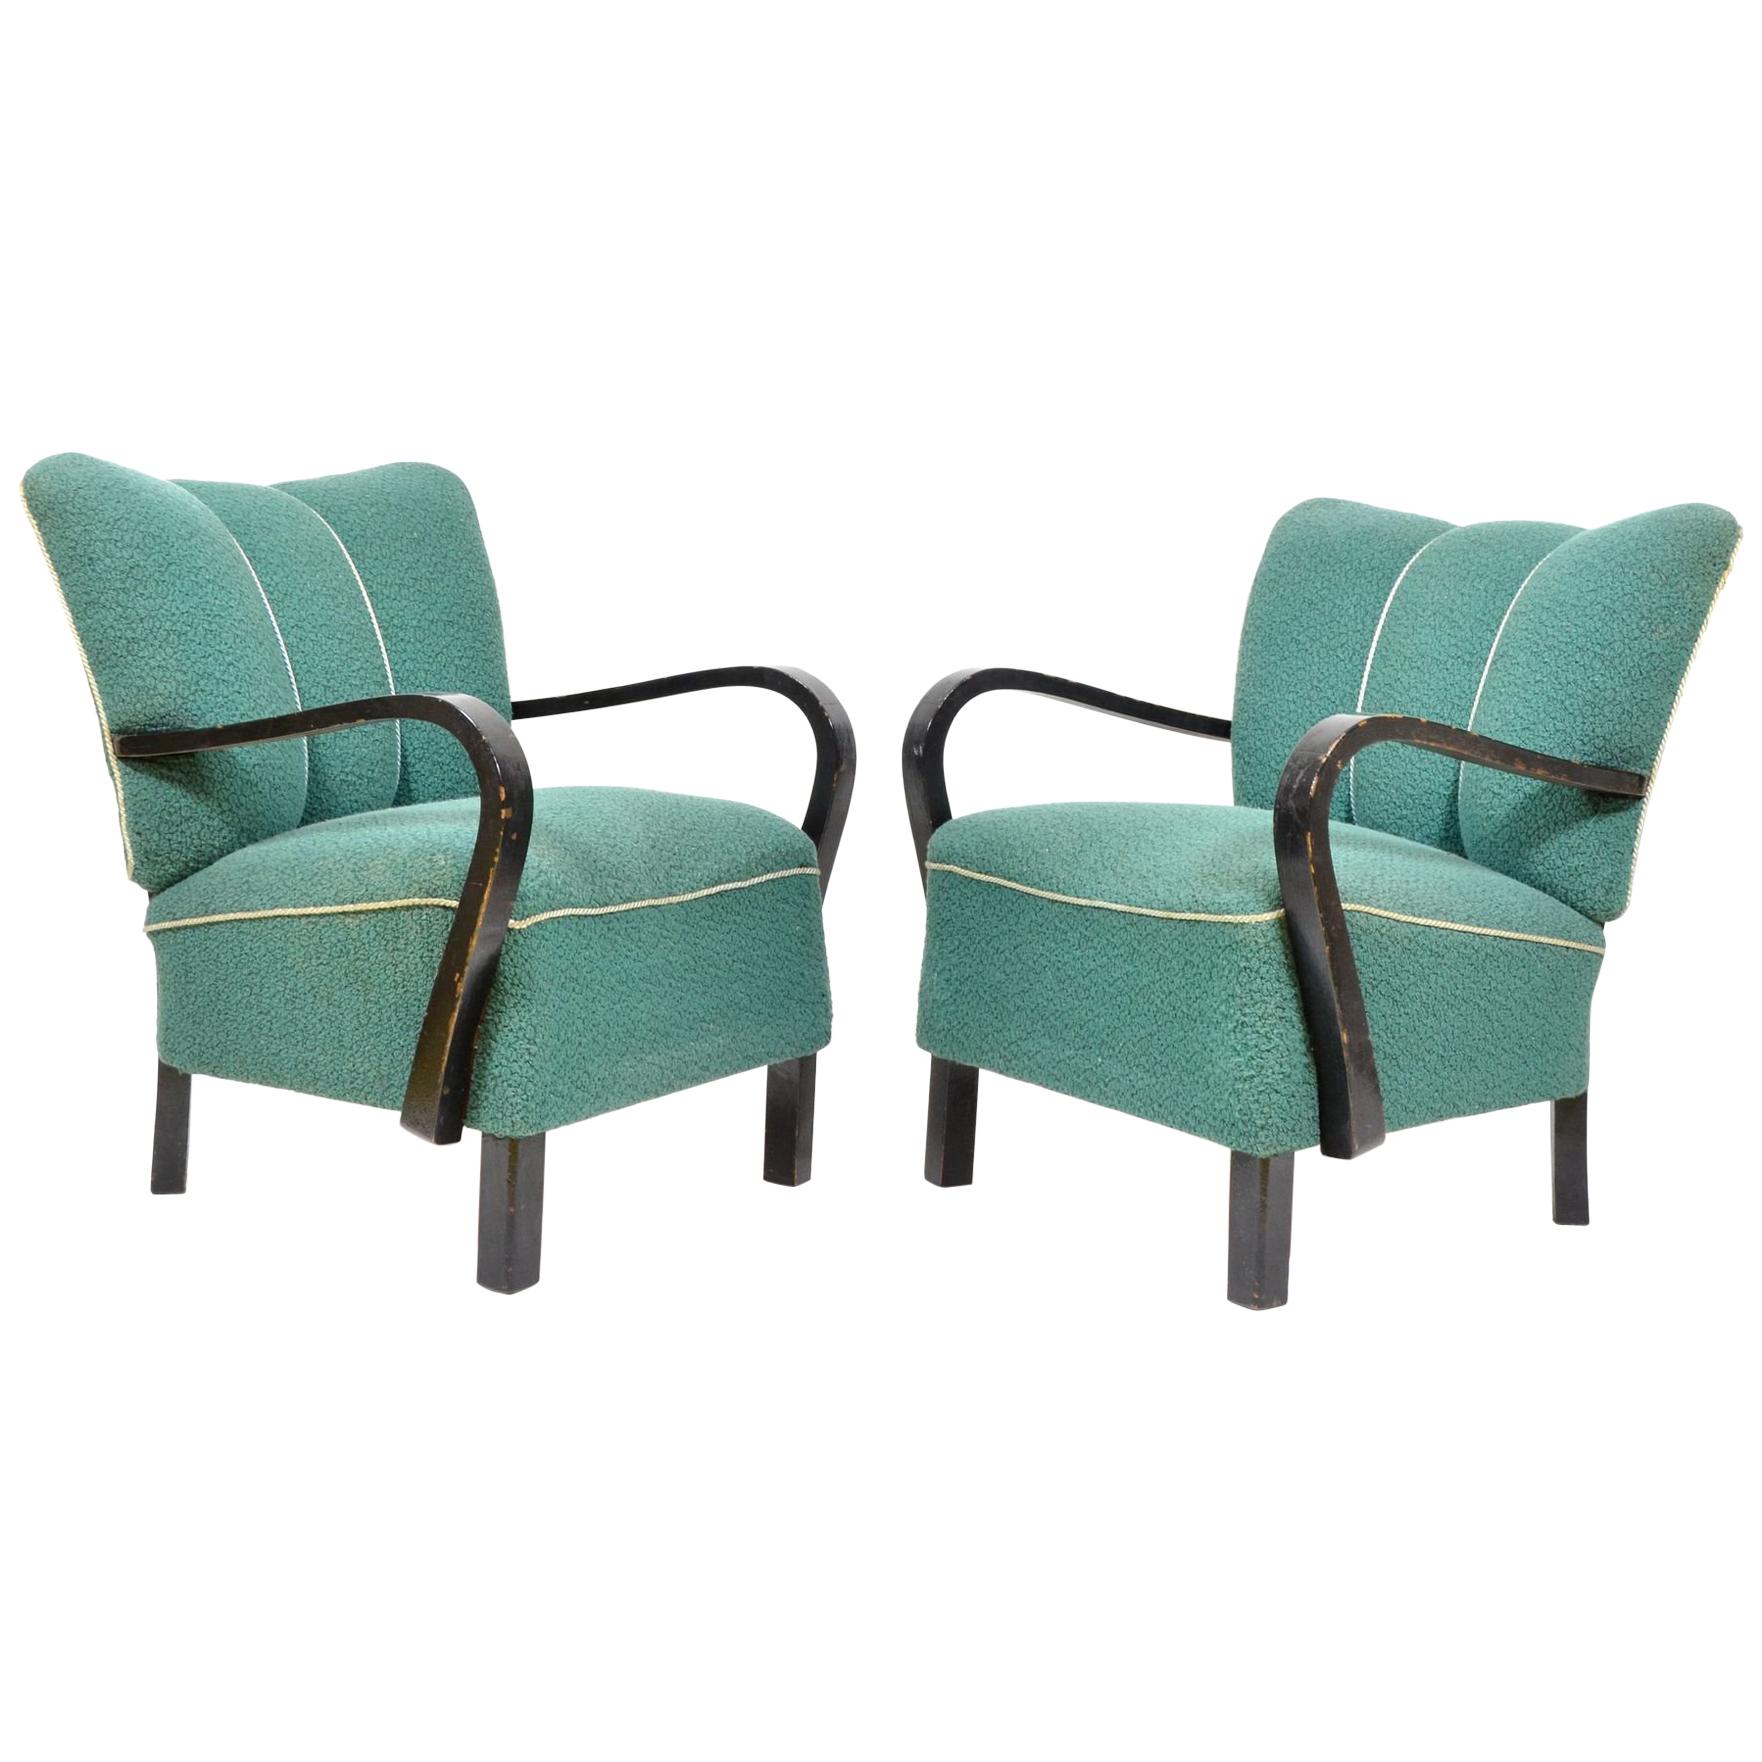 Pair of Original Armchairs with Wooden Armrests, Czechoslovakia, 1940s For Sale